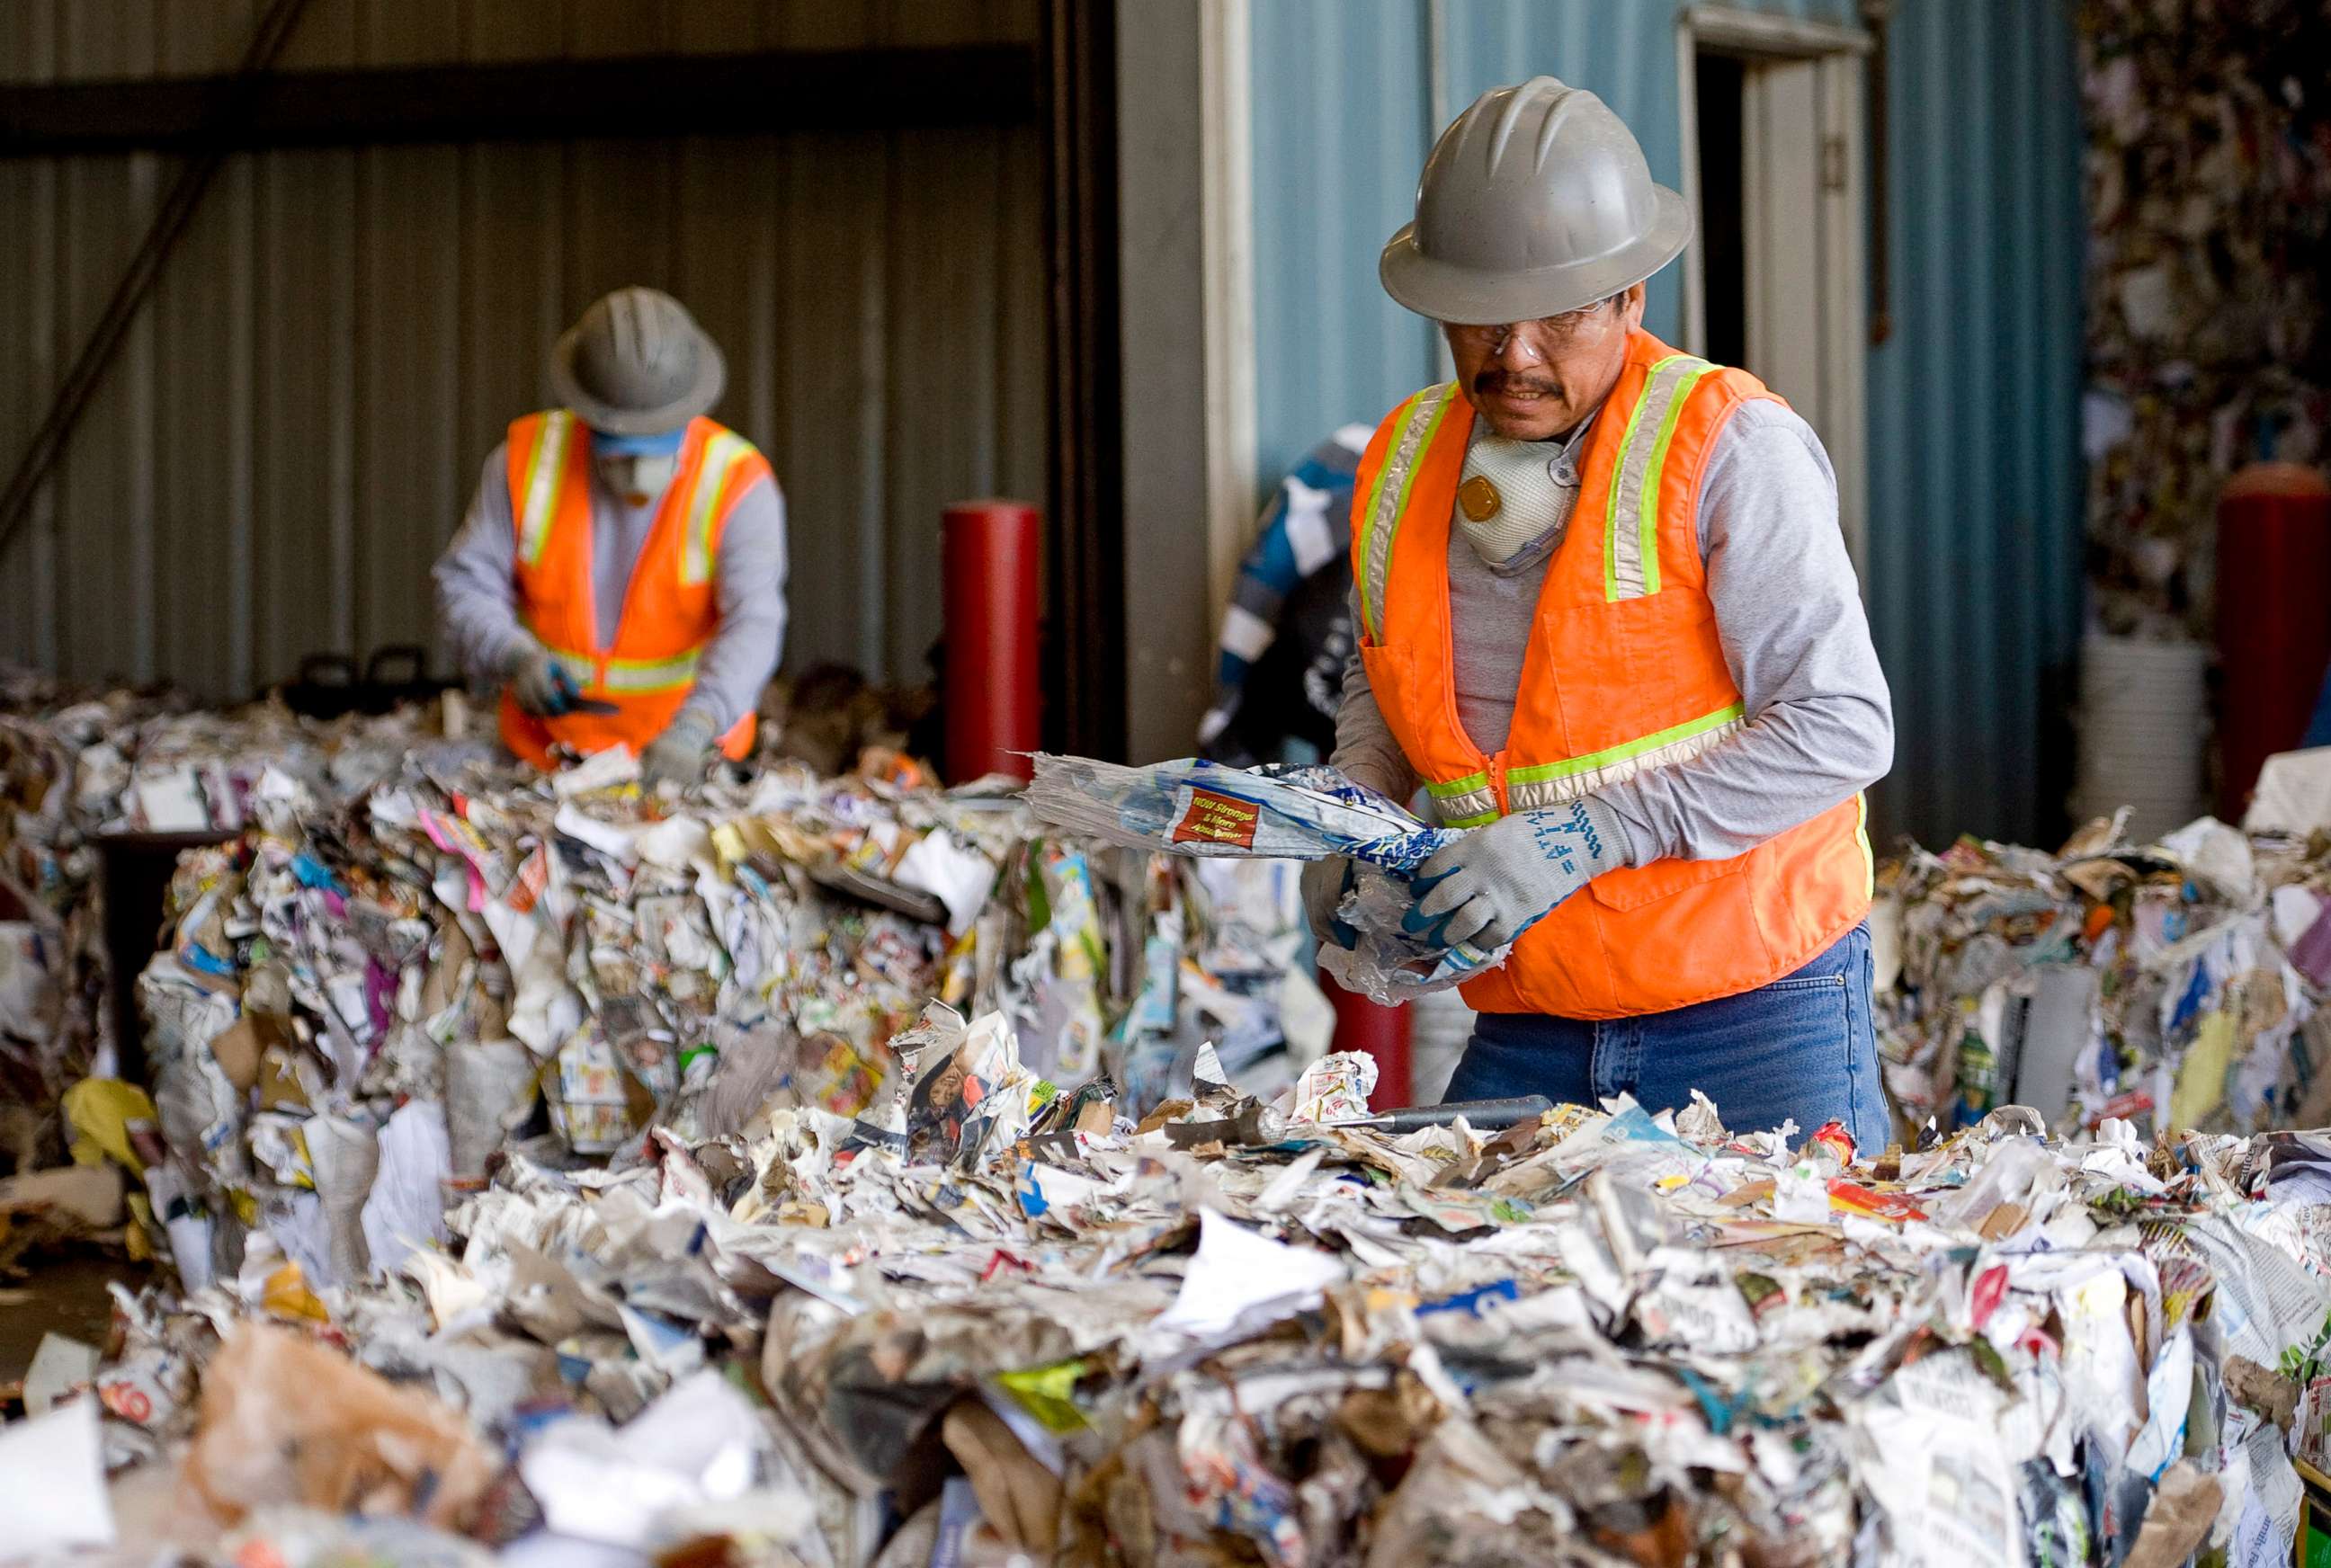 PHOTO: Workers remove plastic from piles of paper, plastic, metal and green waste at a recycling plant in Huntington Beach, Calif.